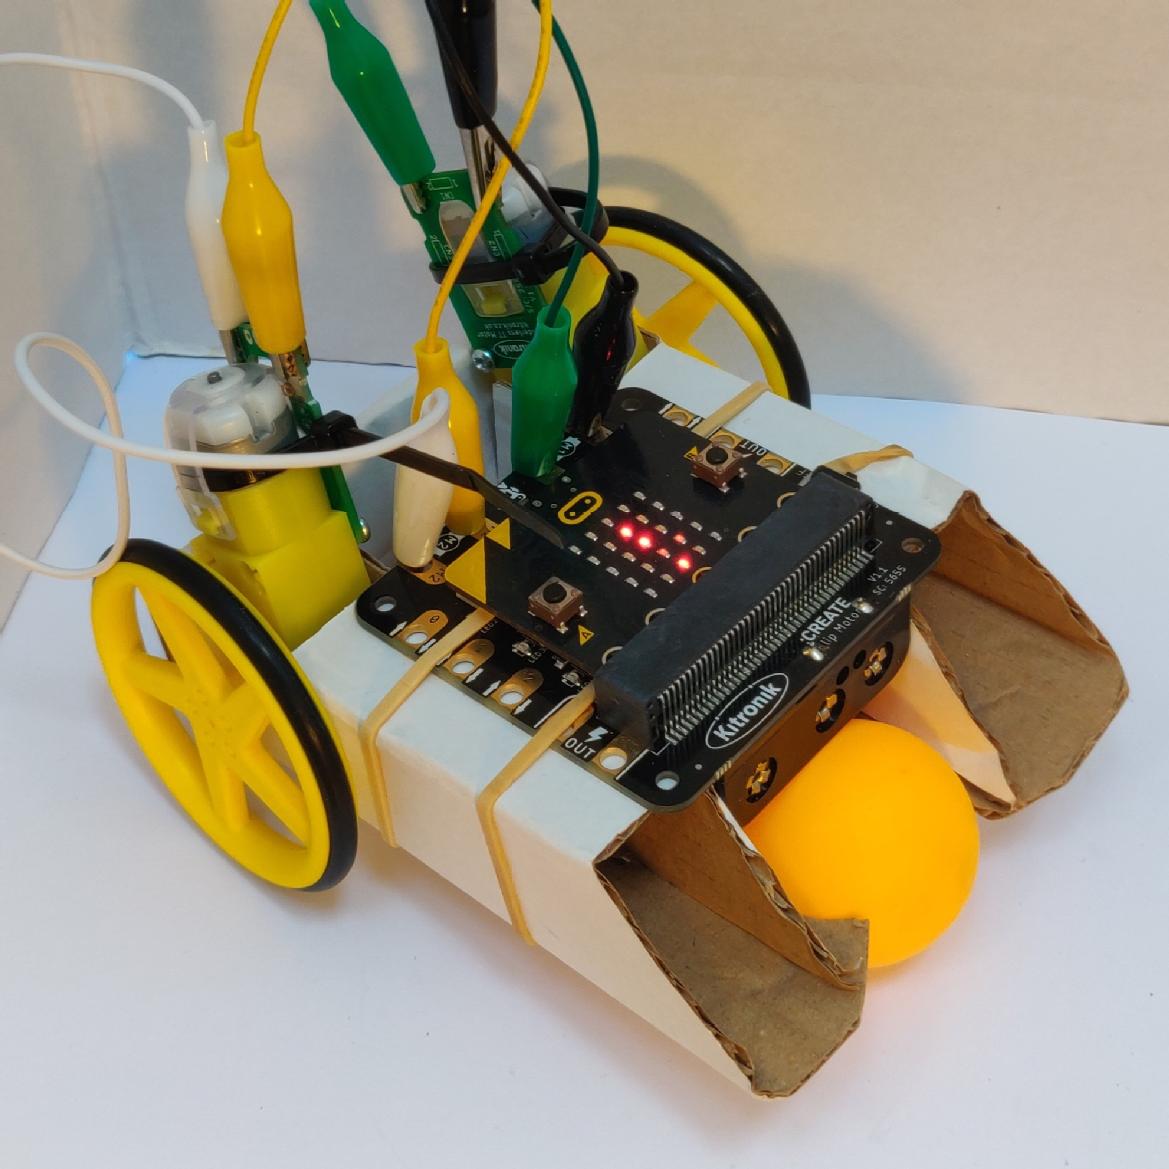 A picture of a vehicle kit with a cardboard chassis and a micro:bit controller